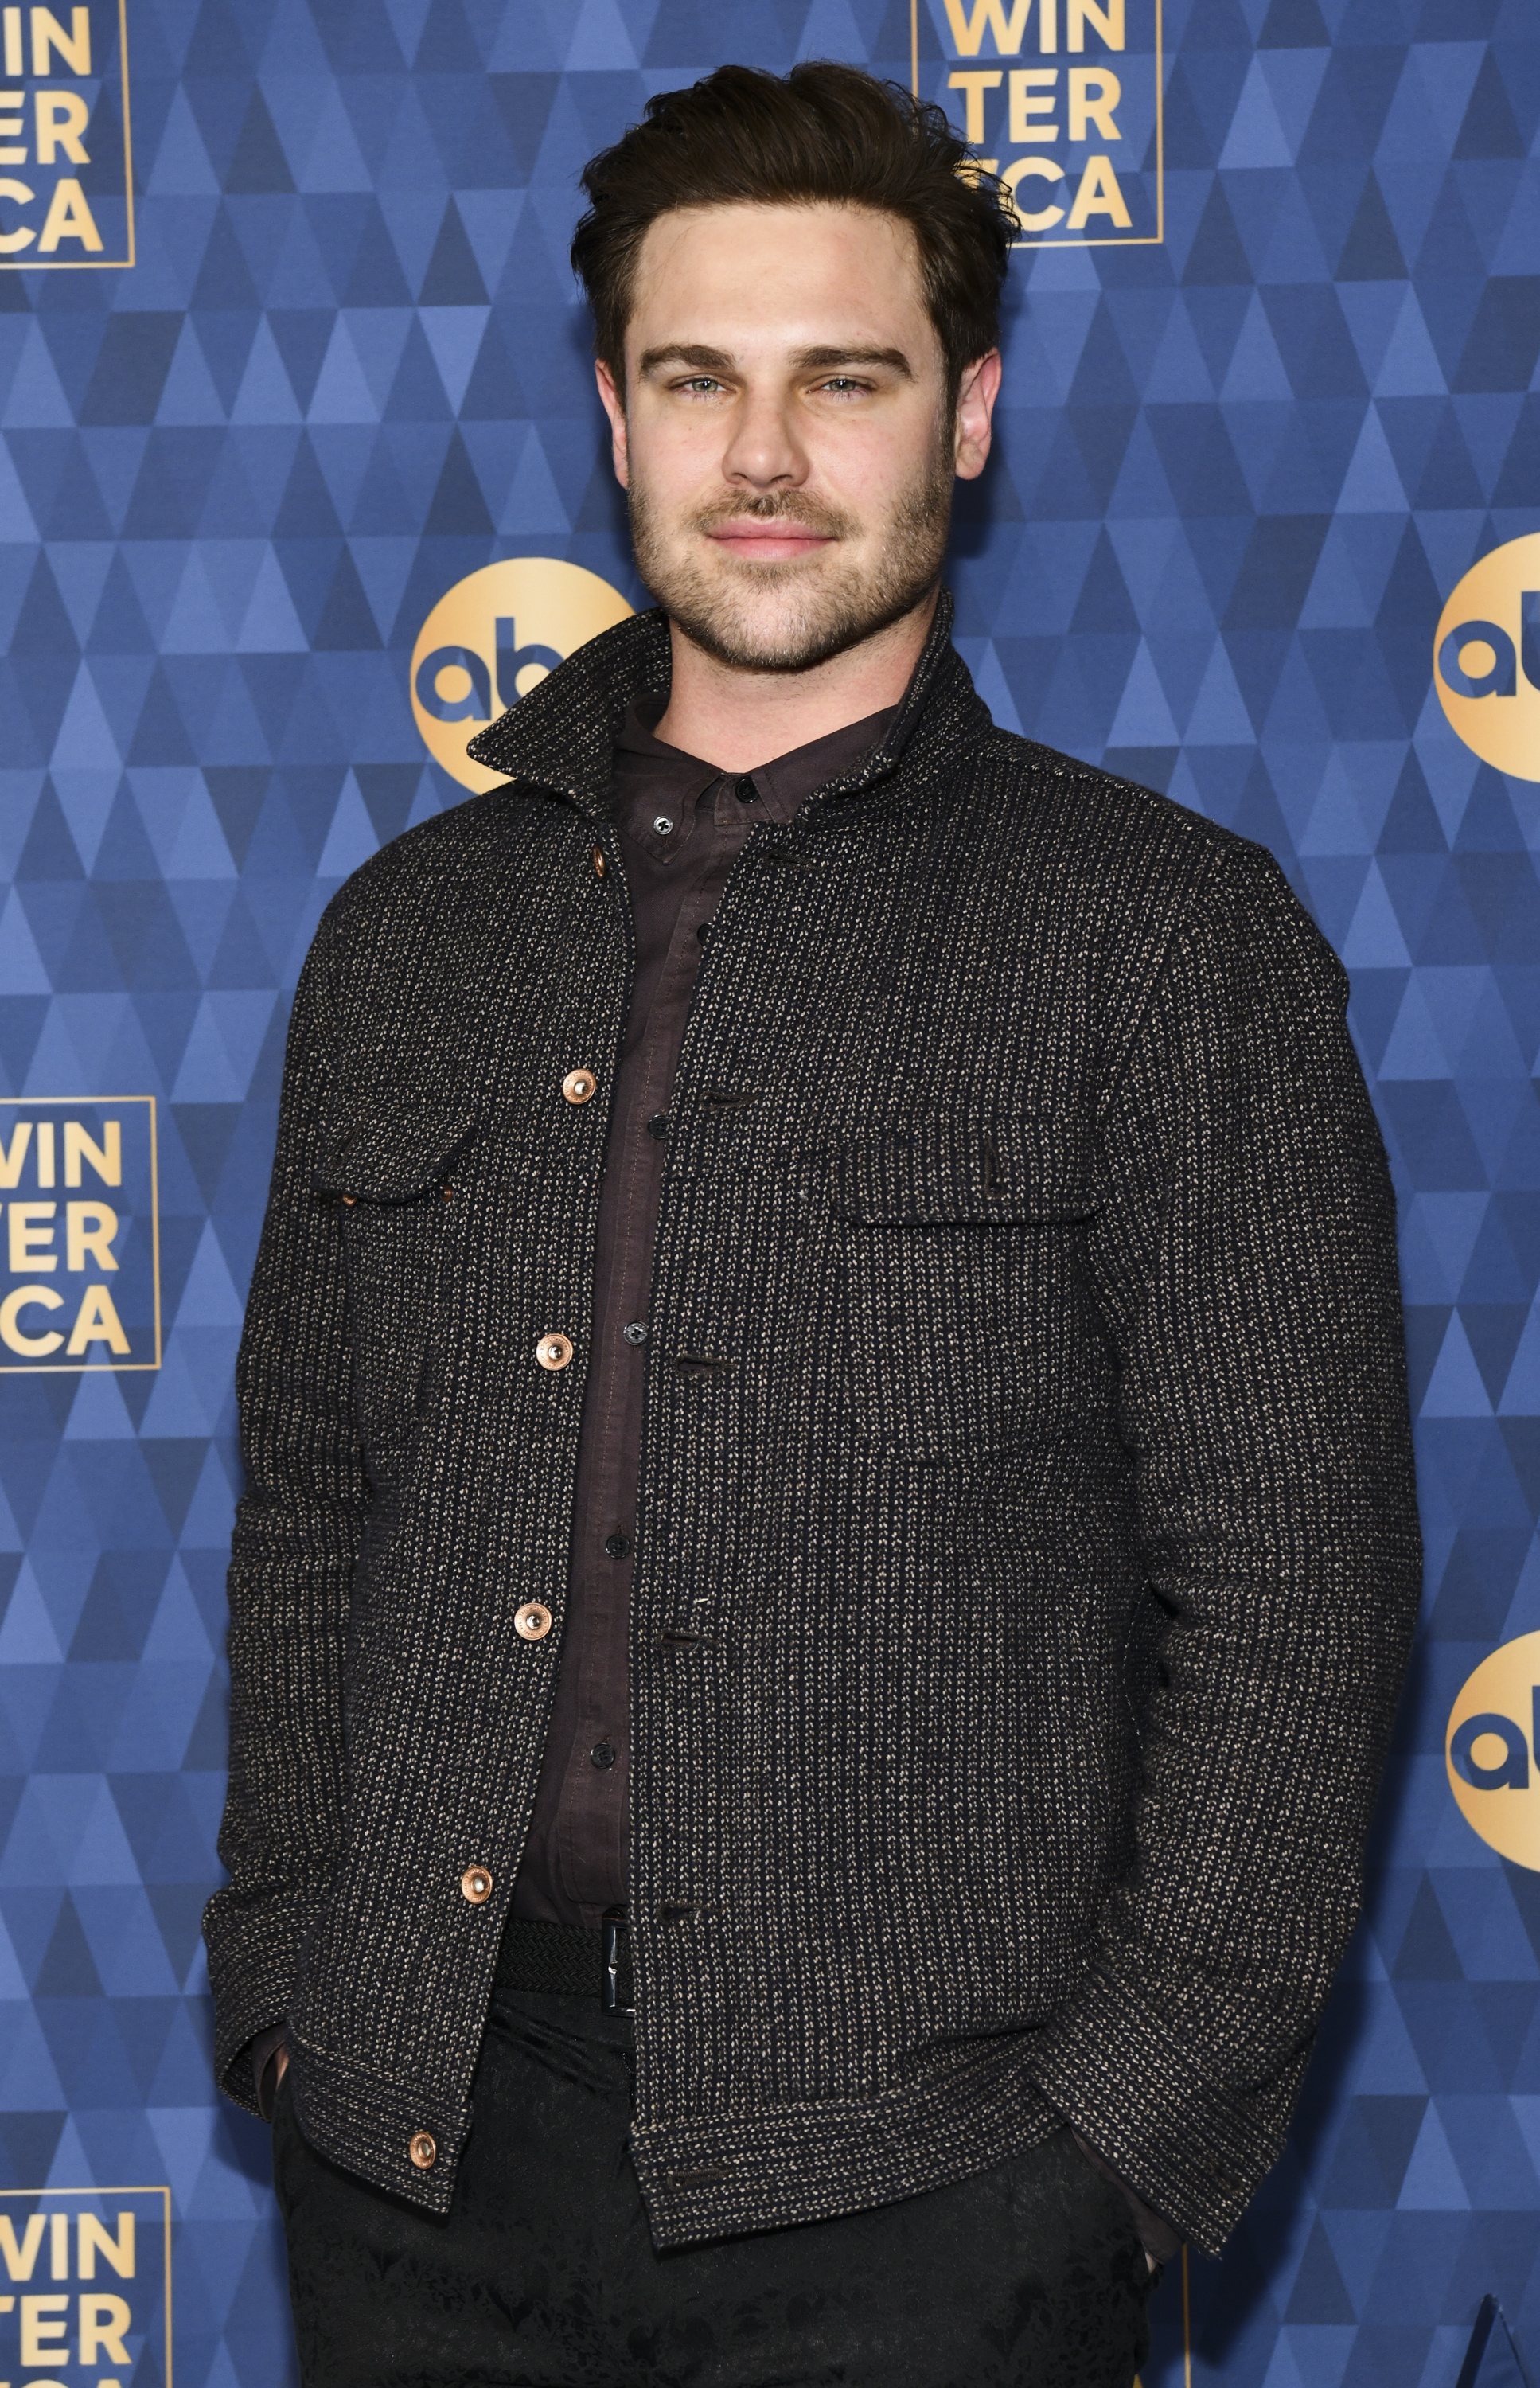 Grey Damon attends ABC Television's Winter Press Tour 2020 at The Langham Huntington, Pasadena on January 8, 2020, in Pasadena, California. | Source: Getty Images